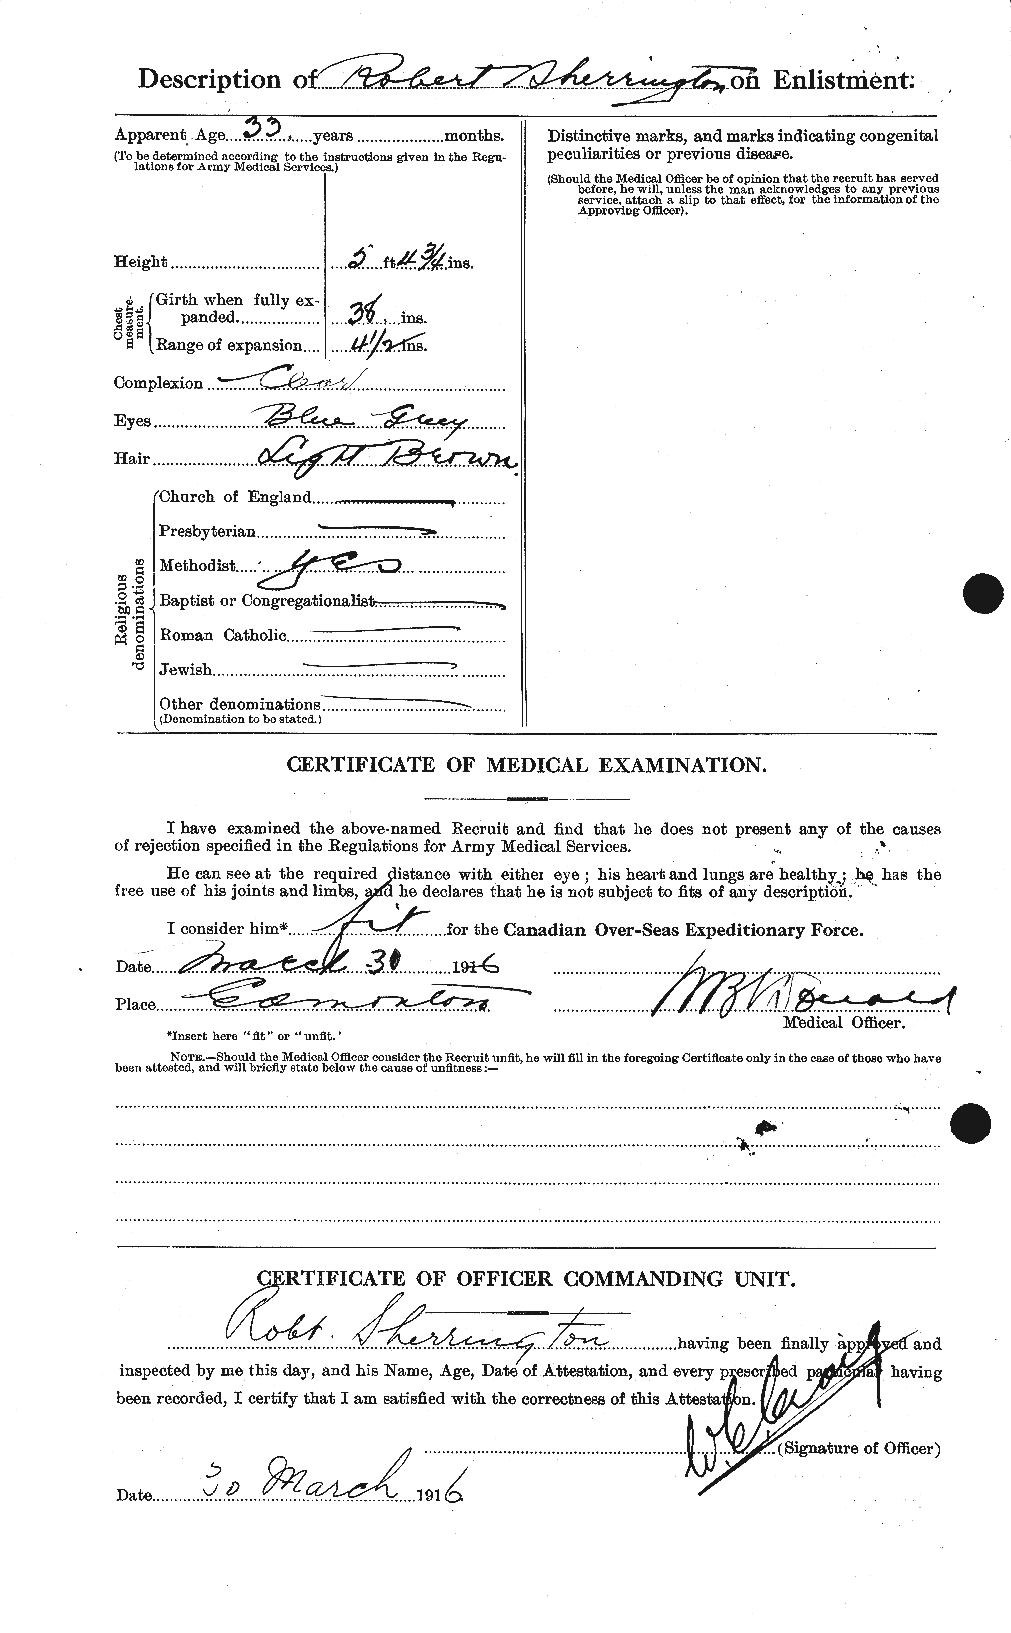 Personnel Records of the First World War - CEF 092373b